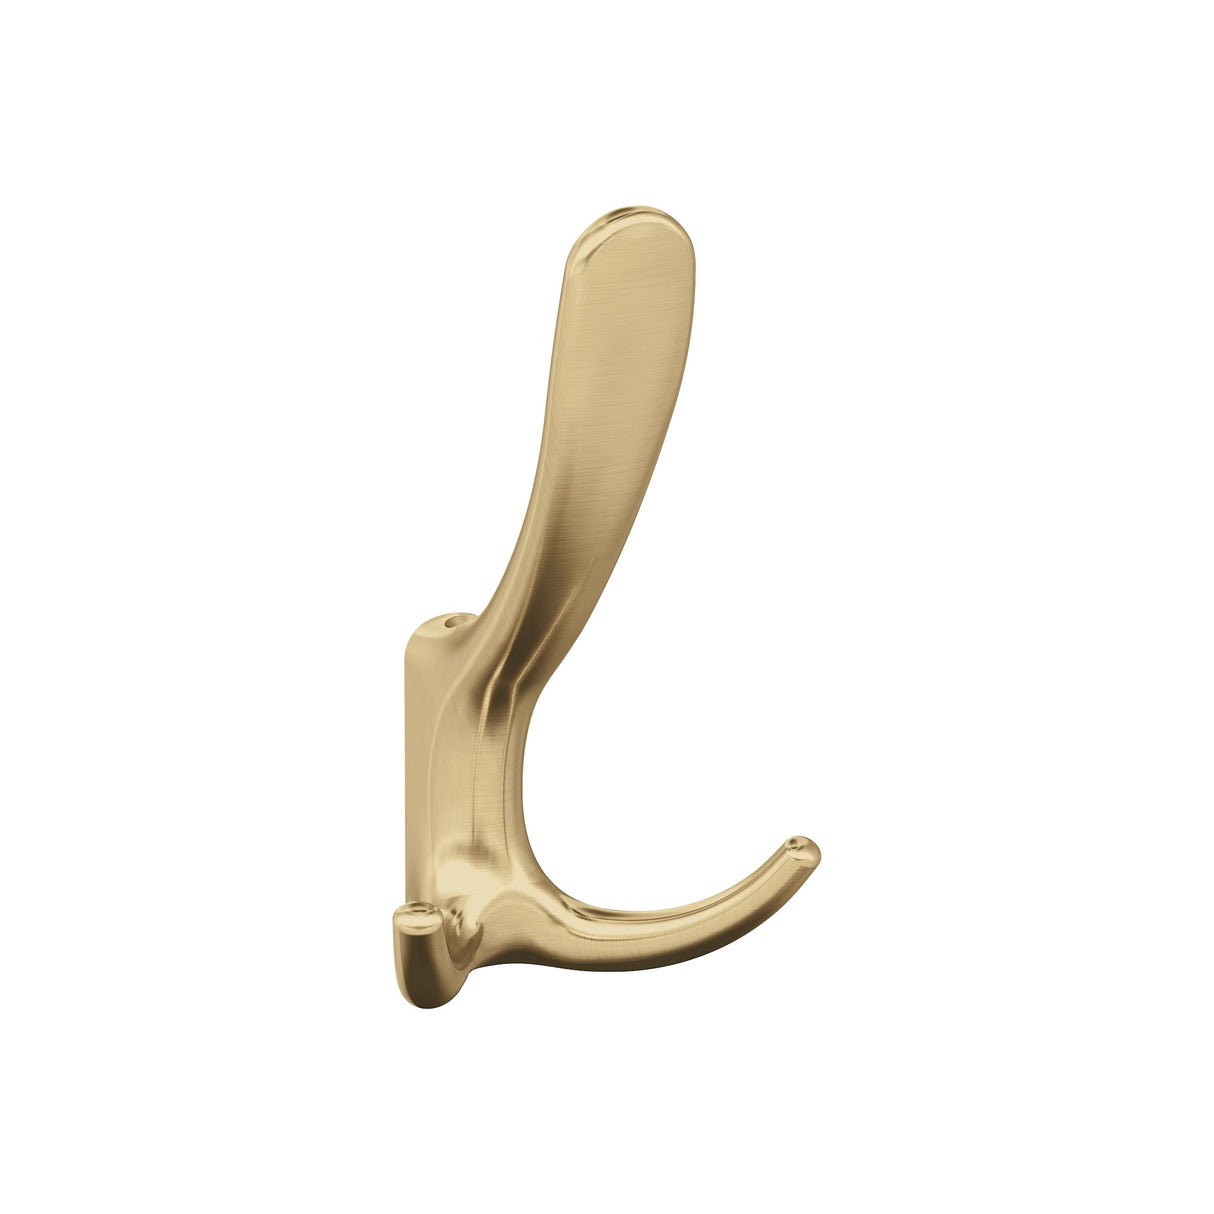 Amerock HBX37013CZ Finesse Triple Prong Decorative Wall Hook Champagne Bronze Hook for Coats, Hats, Backpacks, Bags Hooks for Bathroom, Bedroom, Closet, Entryway, Laundry Room, Office